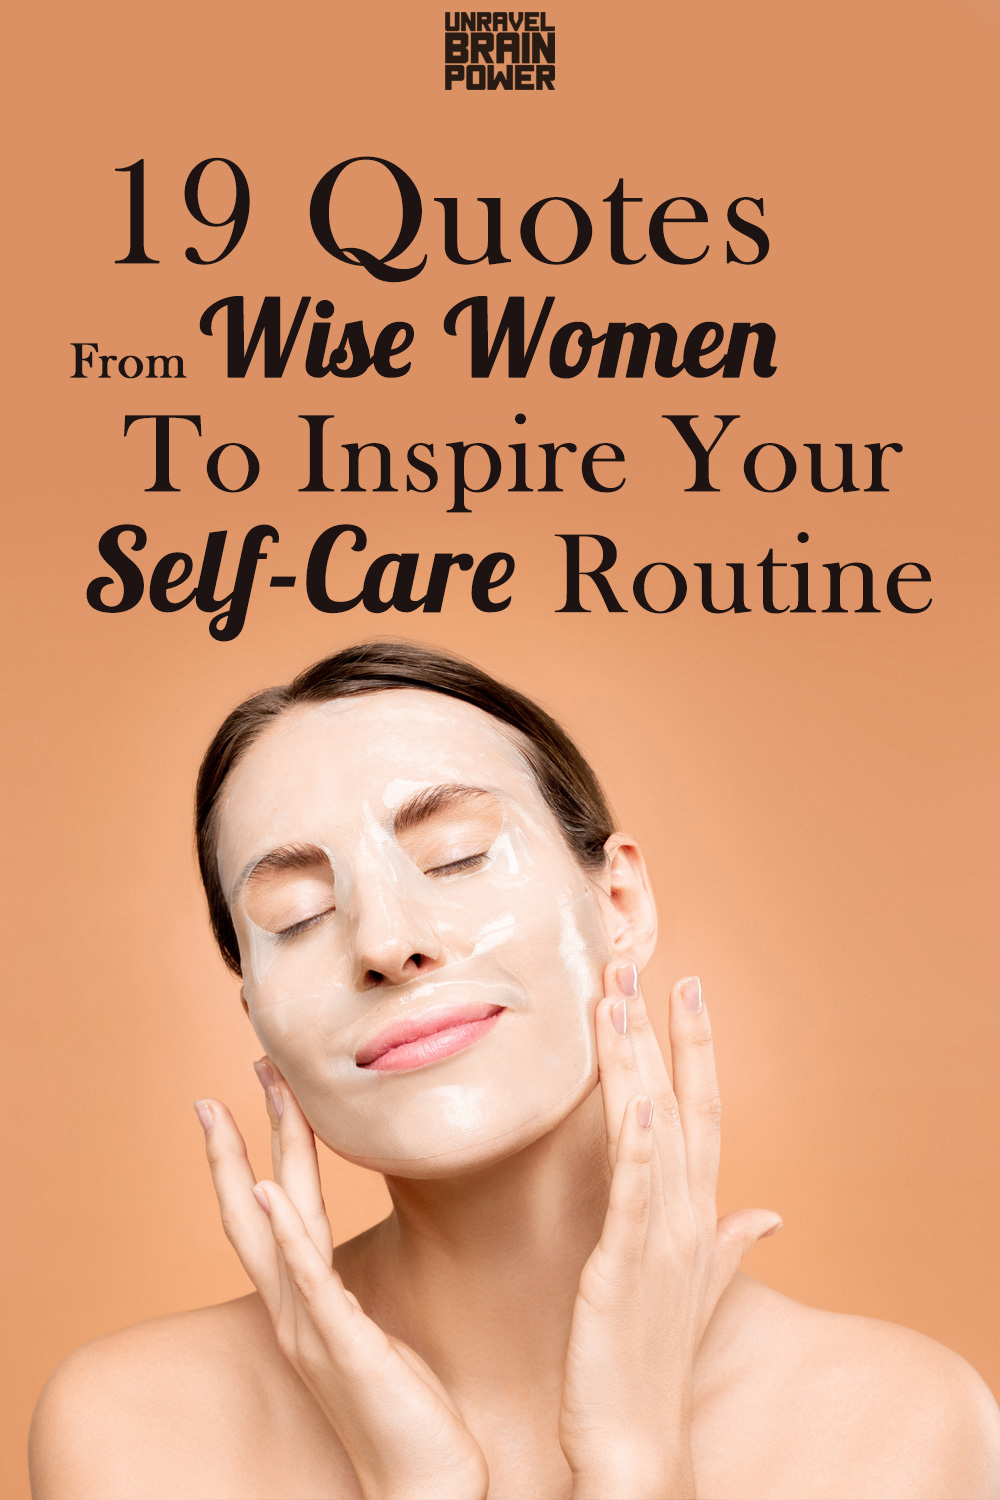 19-quotes-from-wise-women-to-inspire-your-self-care-routine